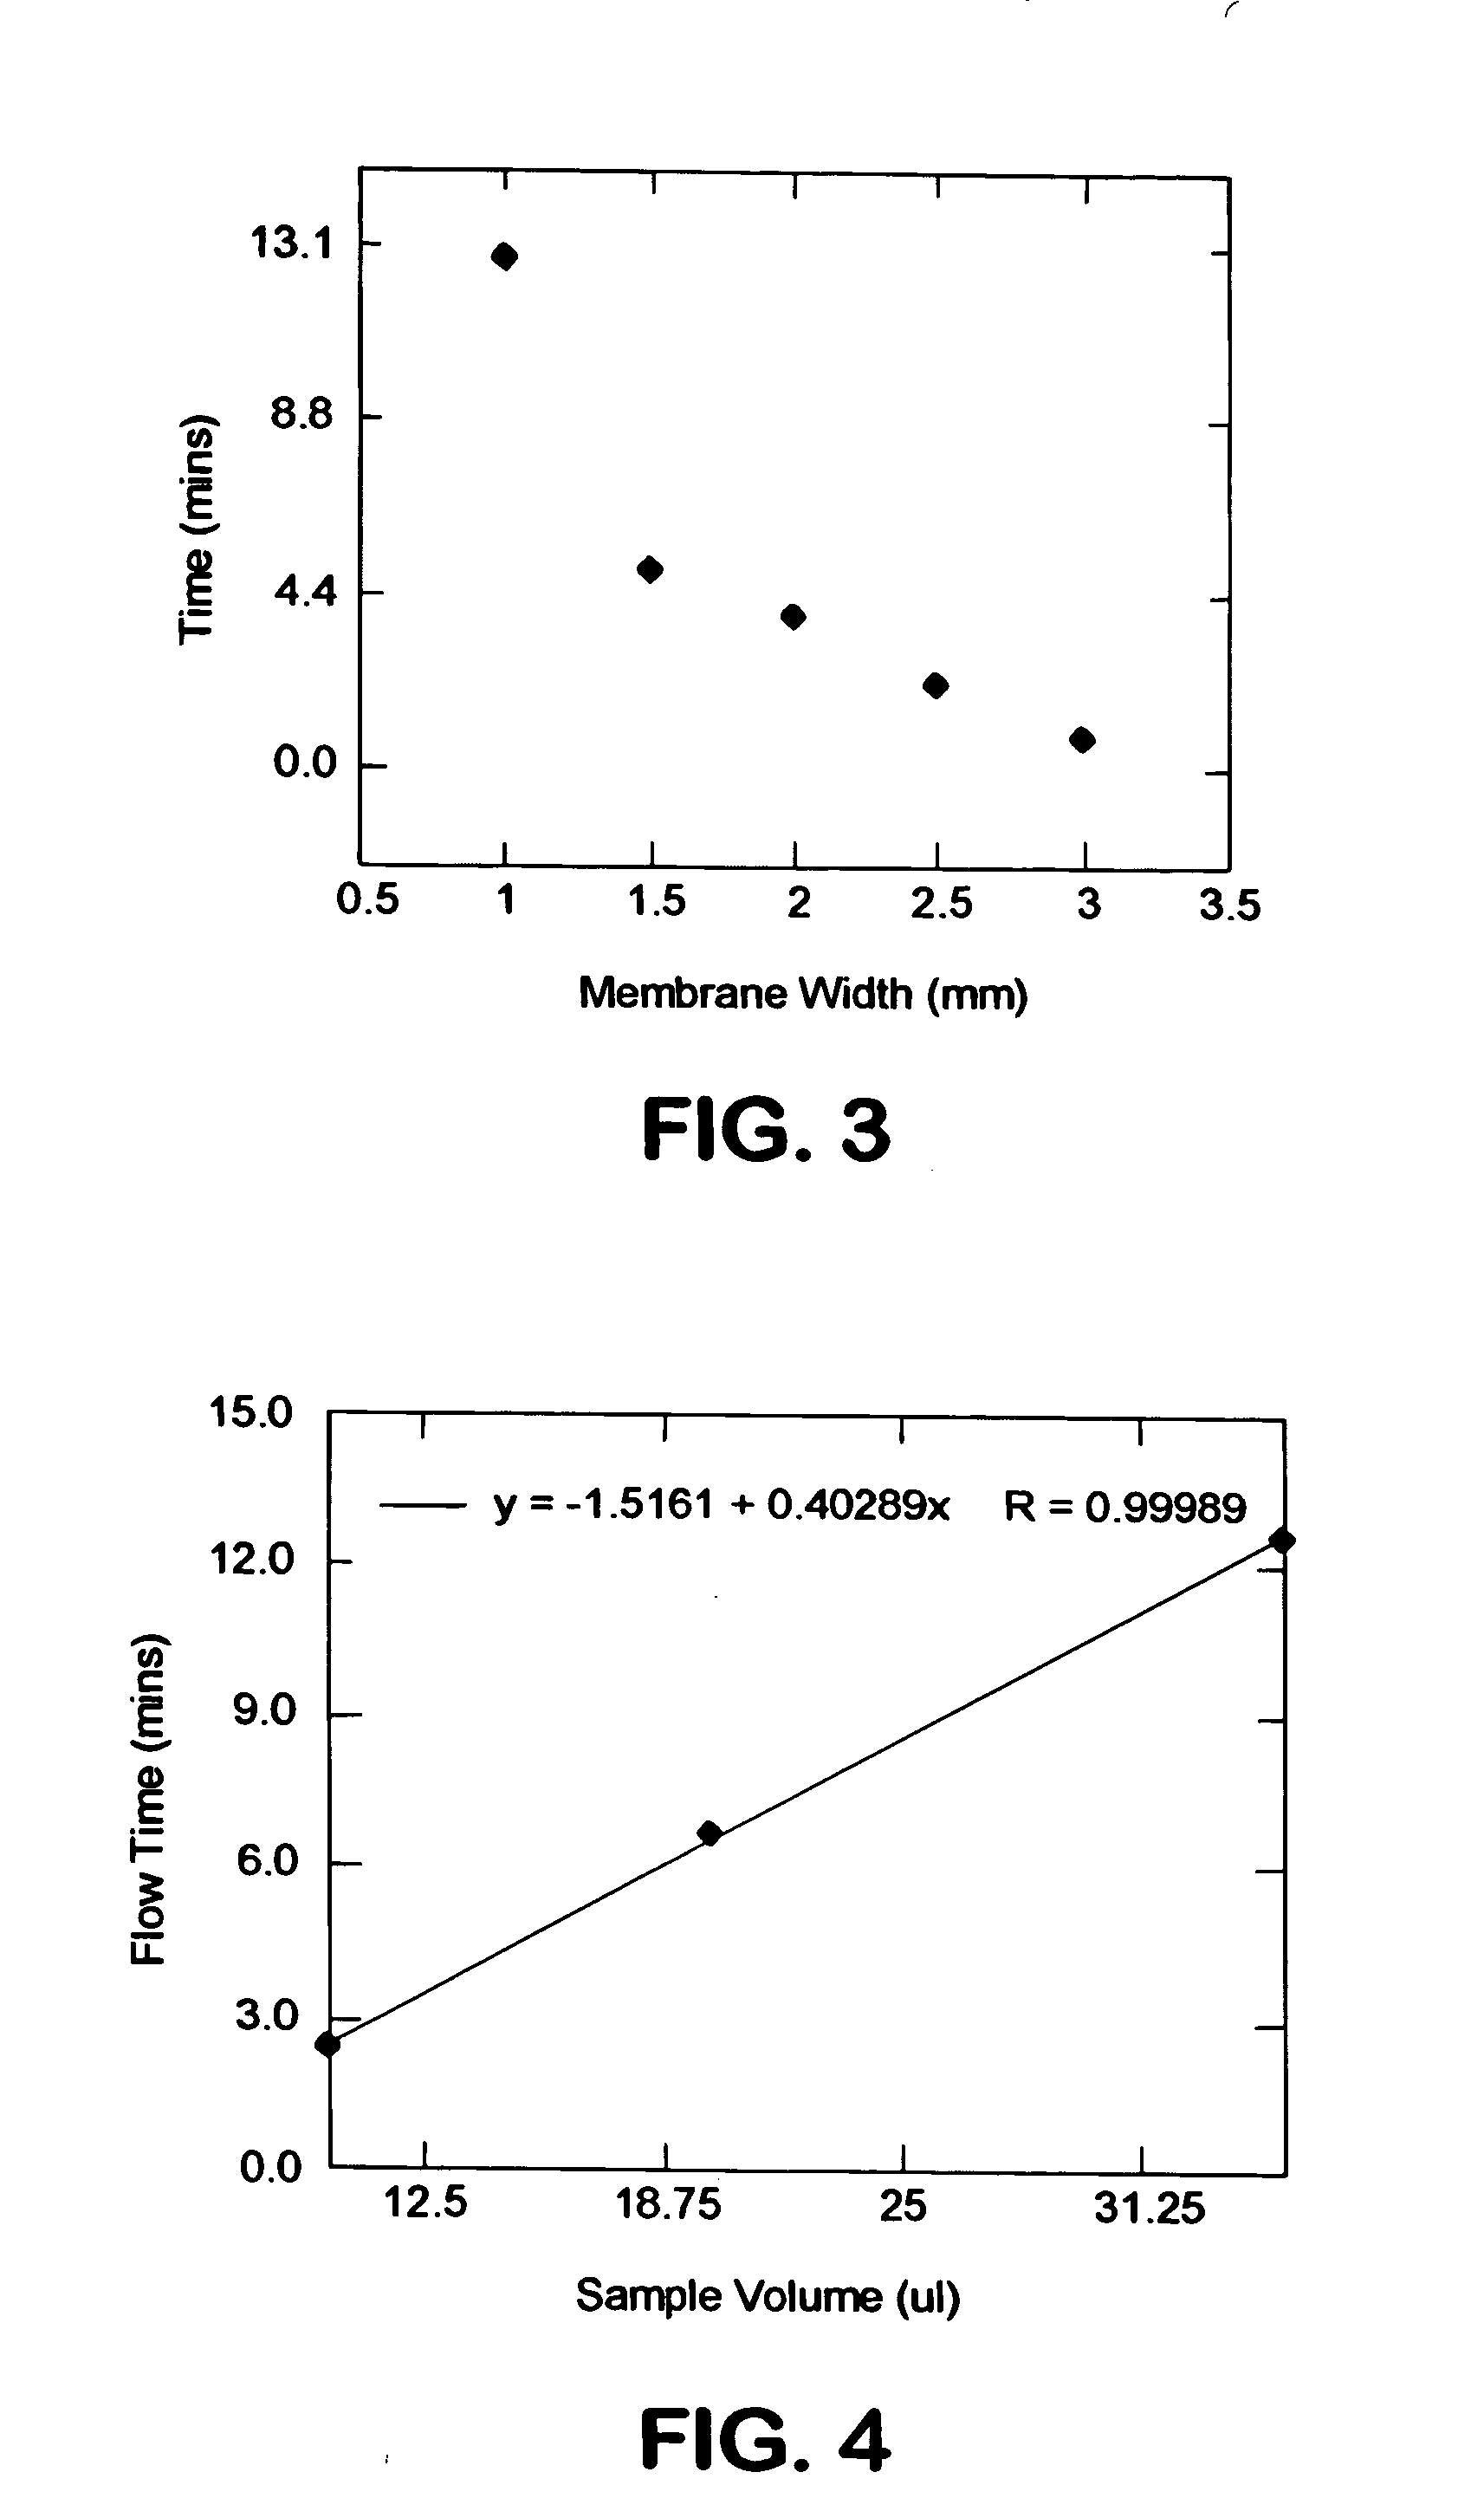 Flow control of electrochemical-based assay devices